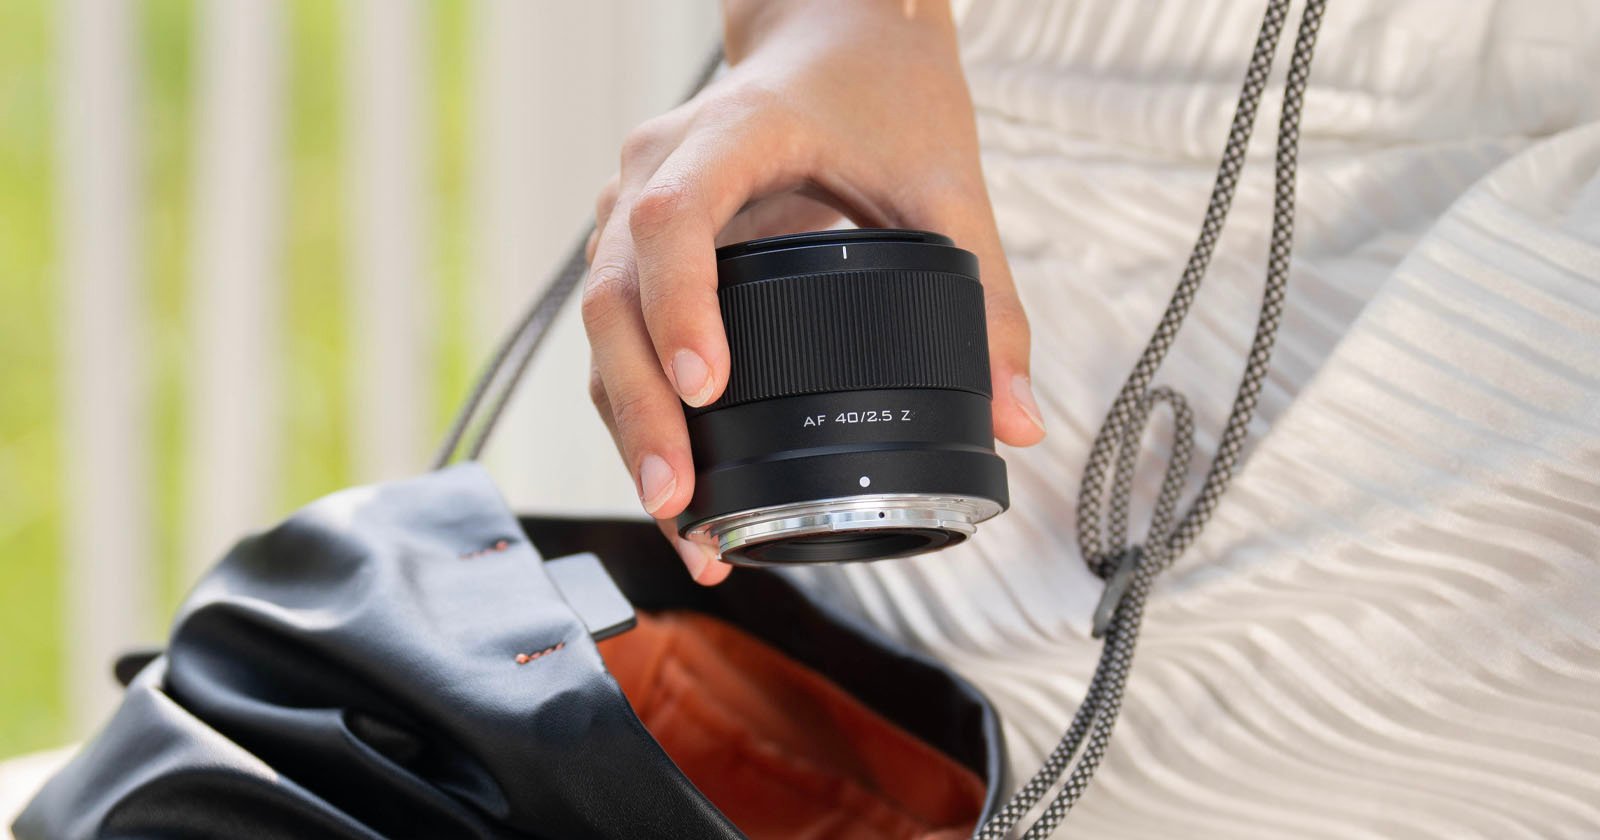 Close-up of a person's hand holding a camera lens over an open black bag, with a blurred green and white background.